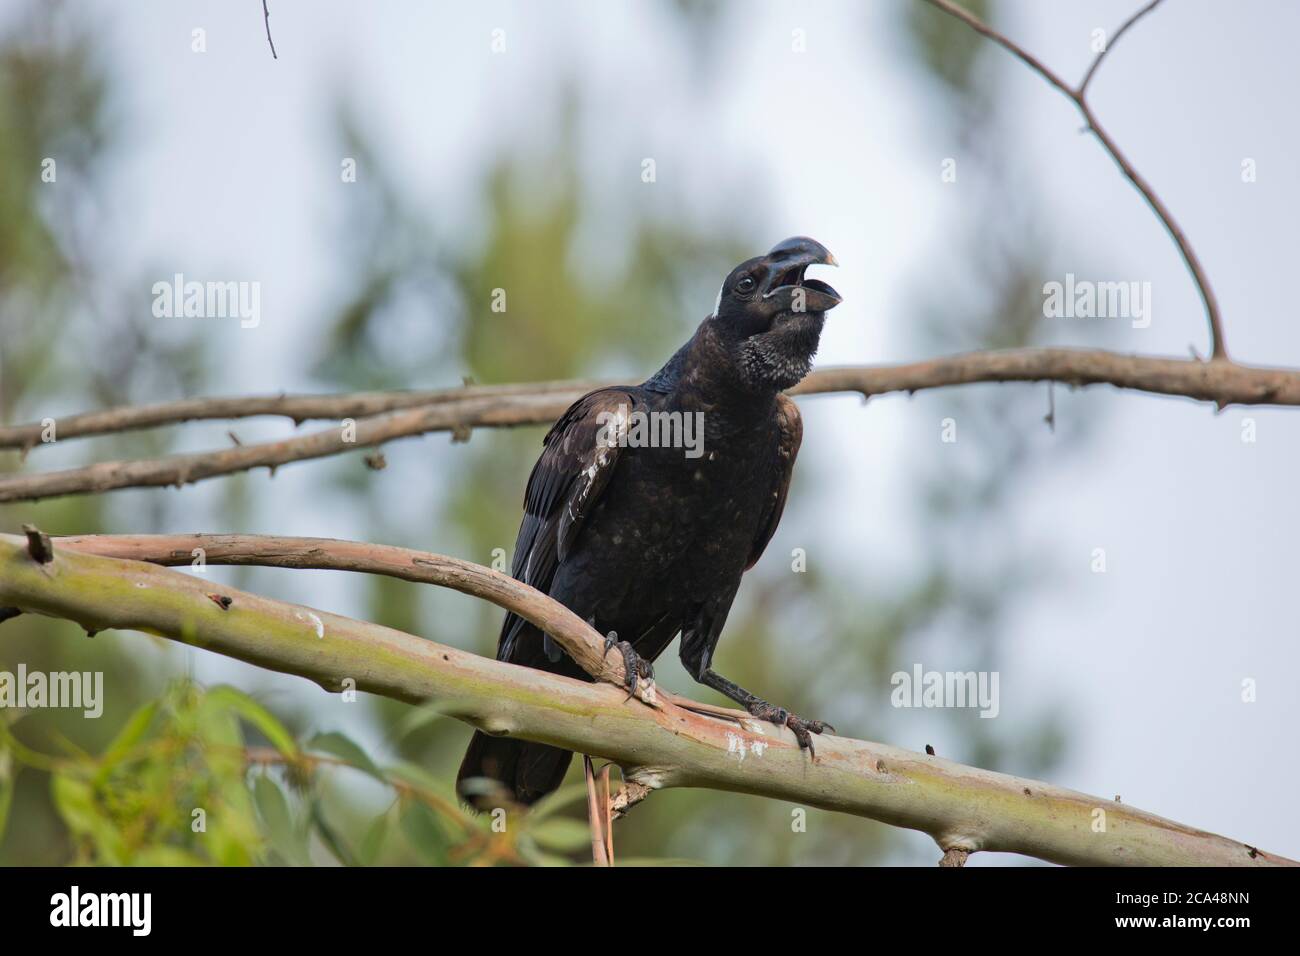 Thick-billed raven (Corvus crassirostris). This bird is the largest member of the raven family and is also the largest perching bird (Passeriformes) r Stock Photo